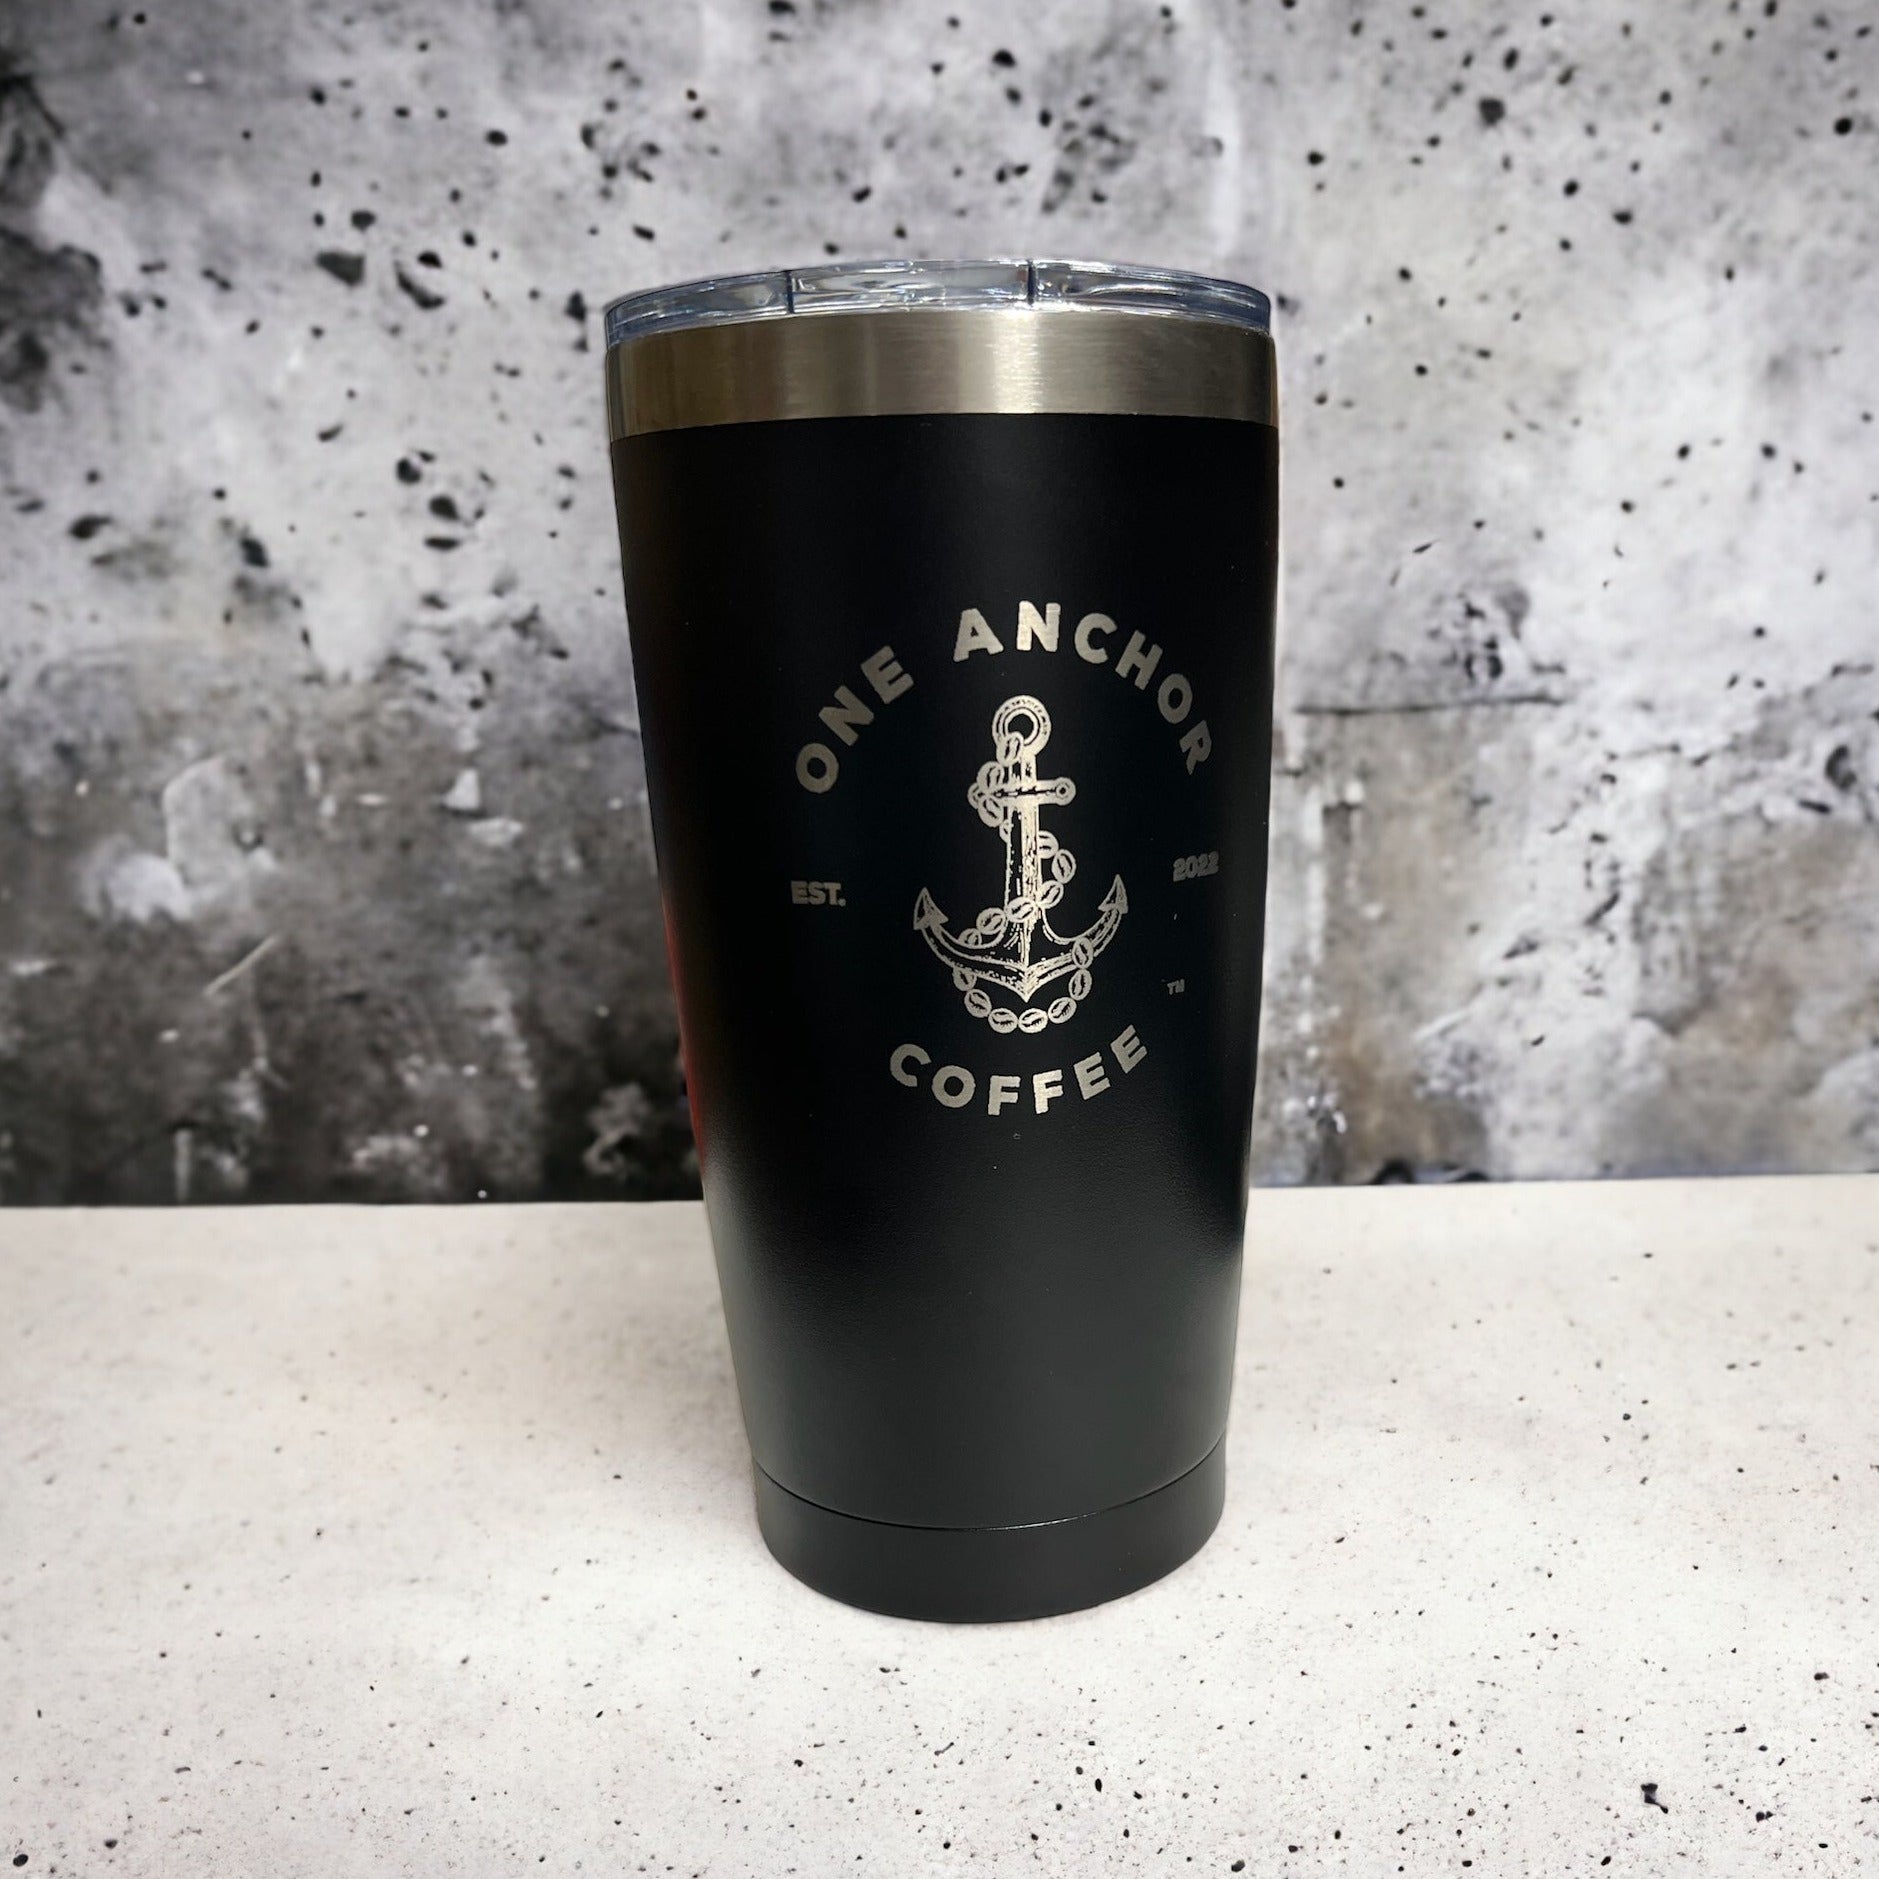 Engine 1 Red Tumbler 20oz - Fire Department Coffee